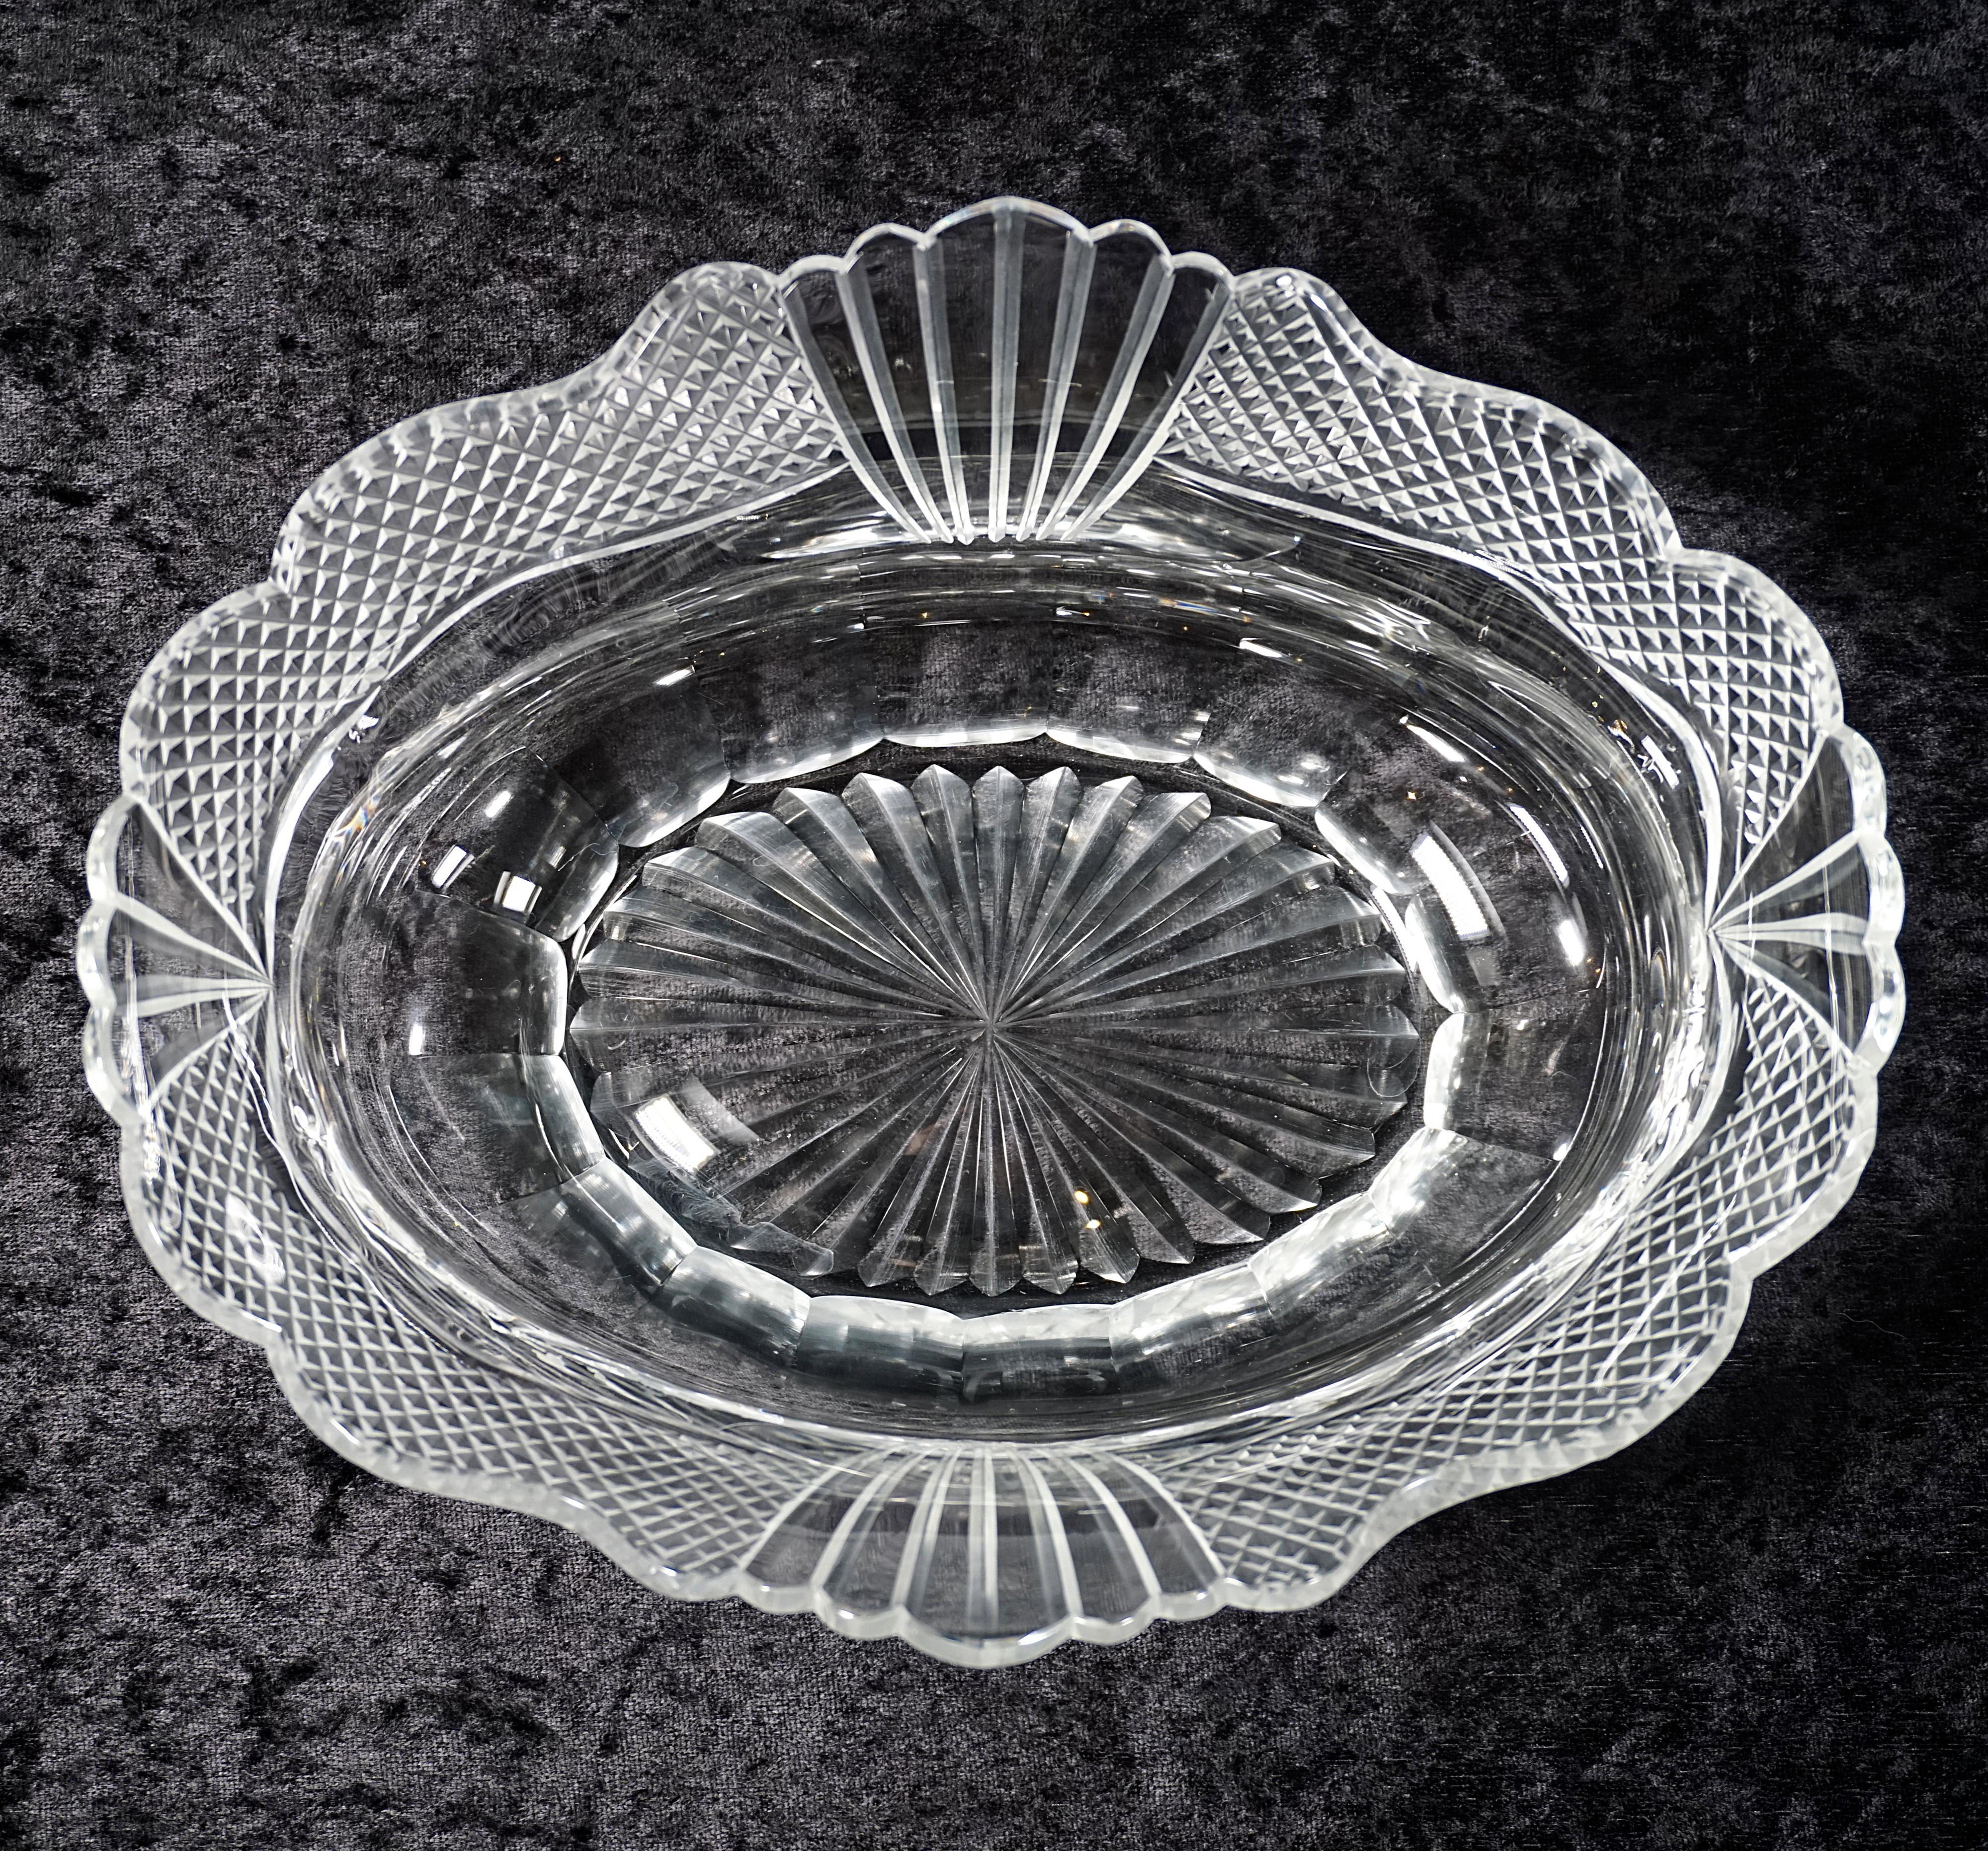 Late 19th Century Silver Jardiniere With Artfully Cut Glass Insert, Wilkens & Sons Germany, 1894 For Sale